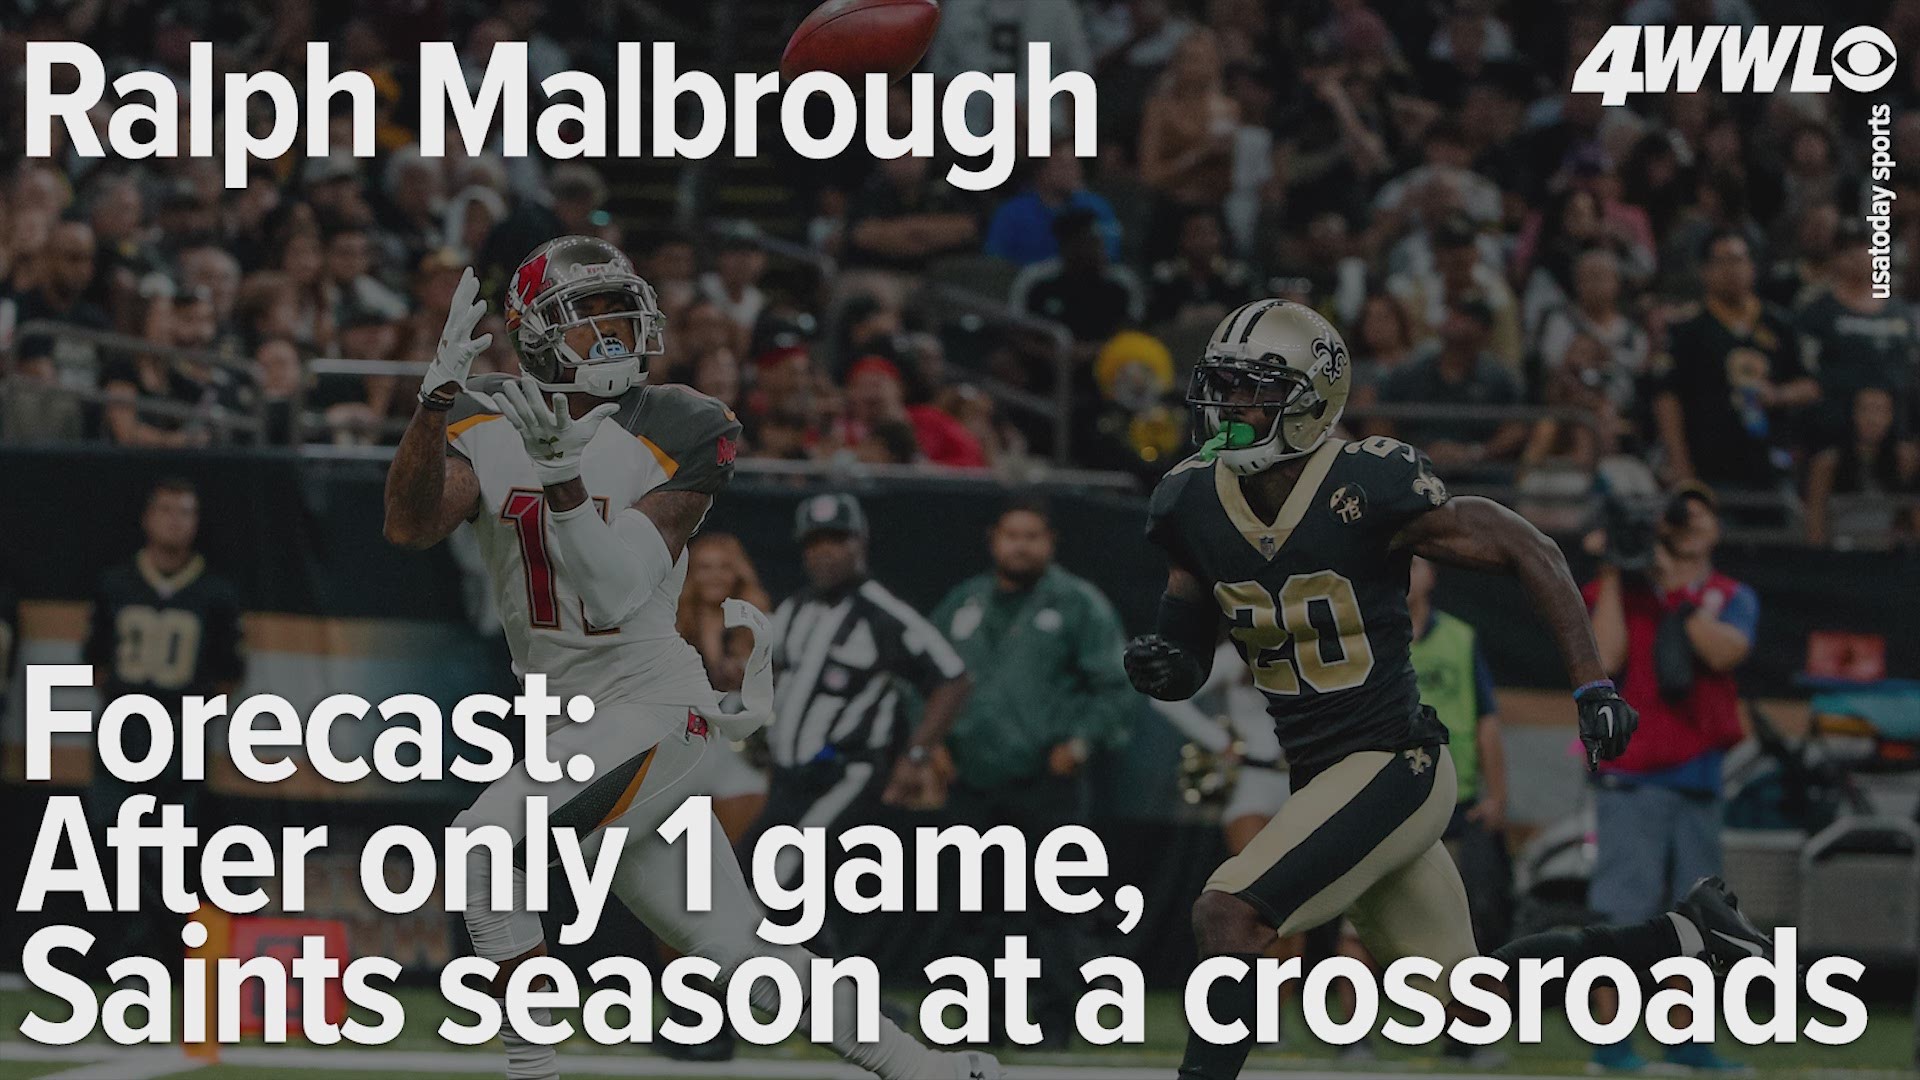 Forecast: After only 1 game, Saints season at a crossroads